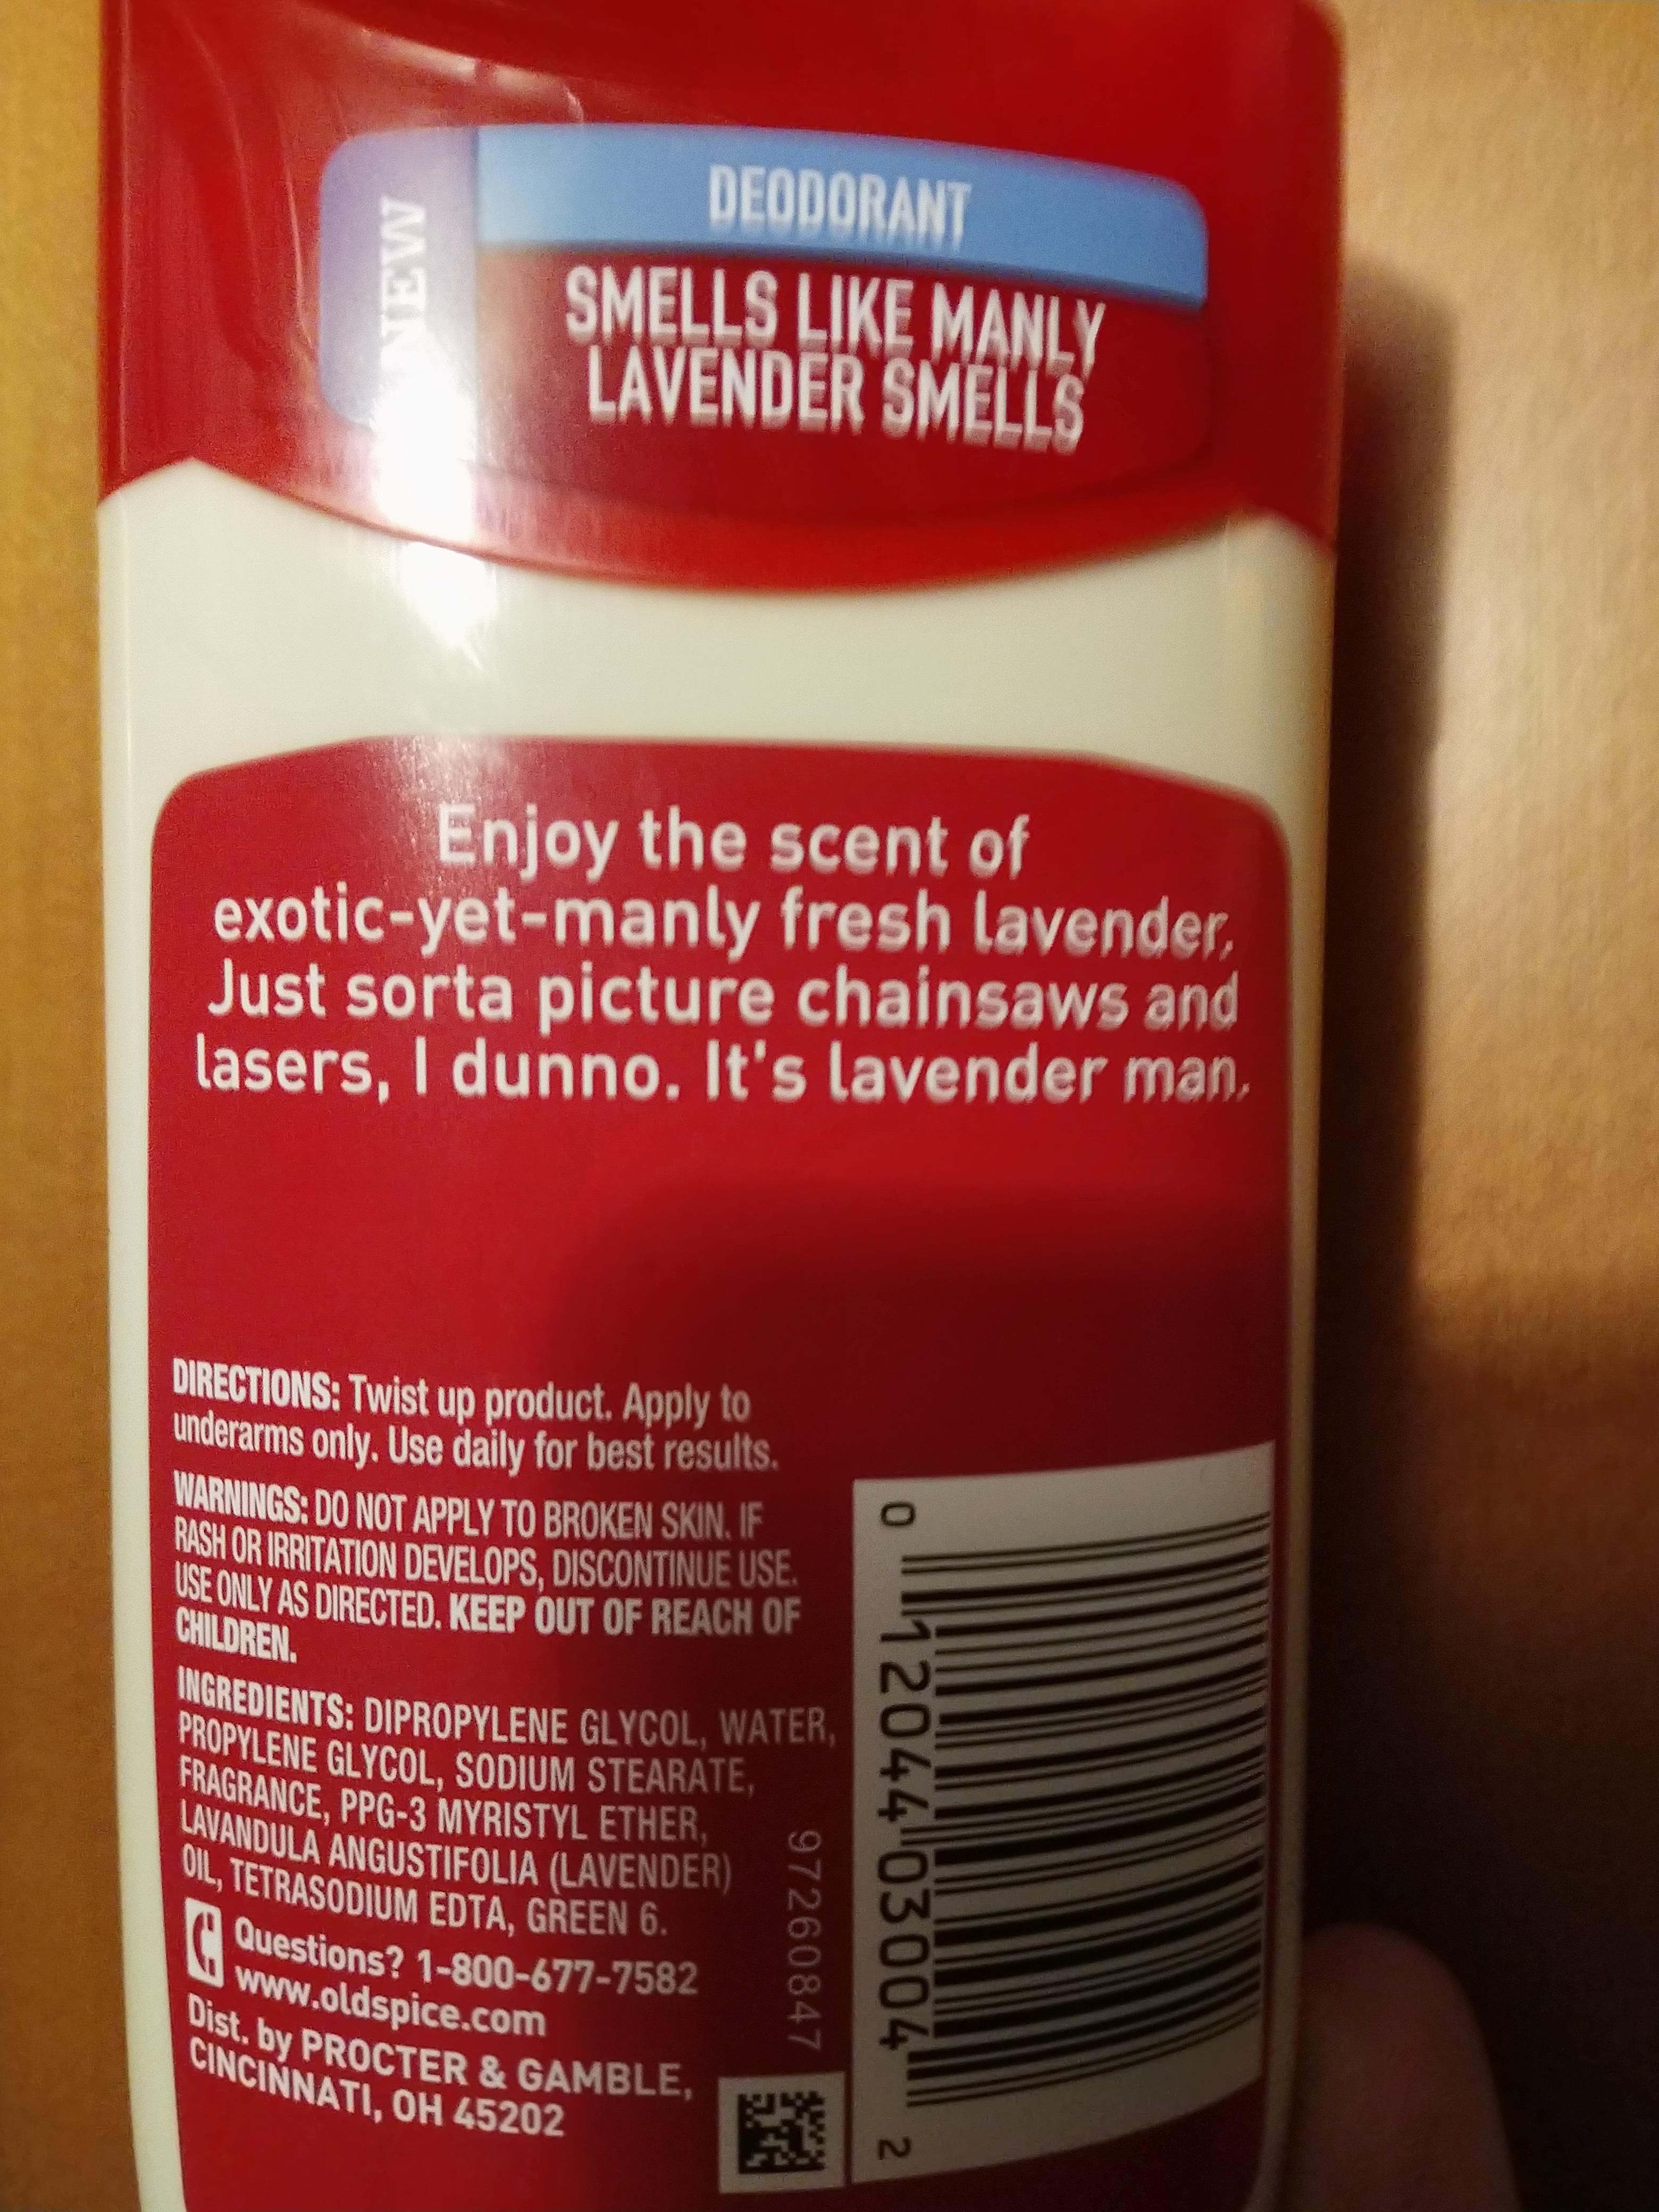 Whenever I buy something from Old Spice, I always read the back.